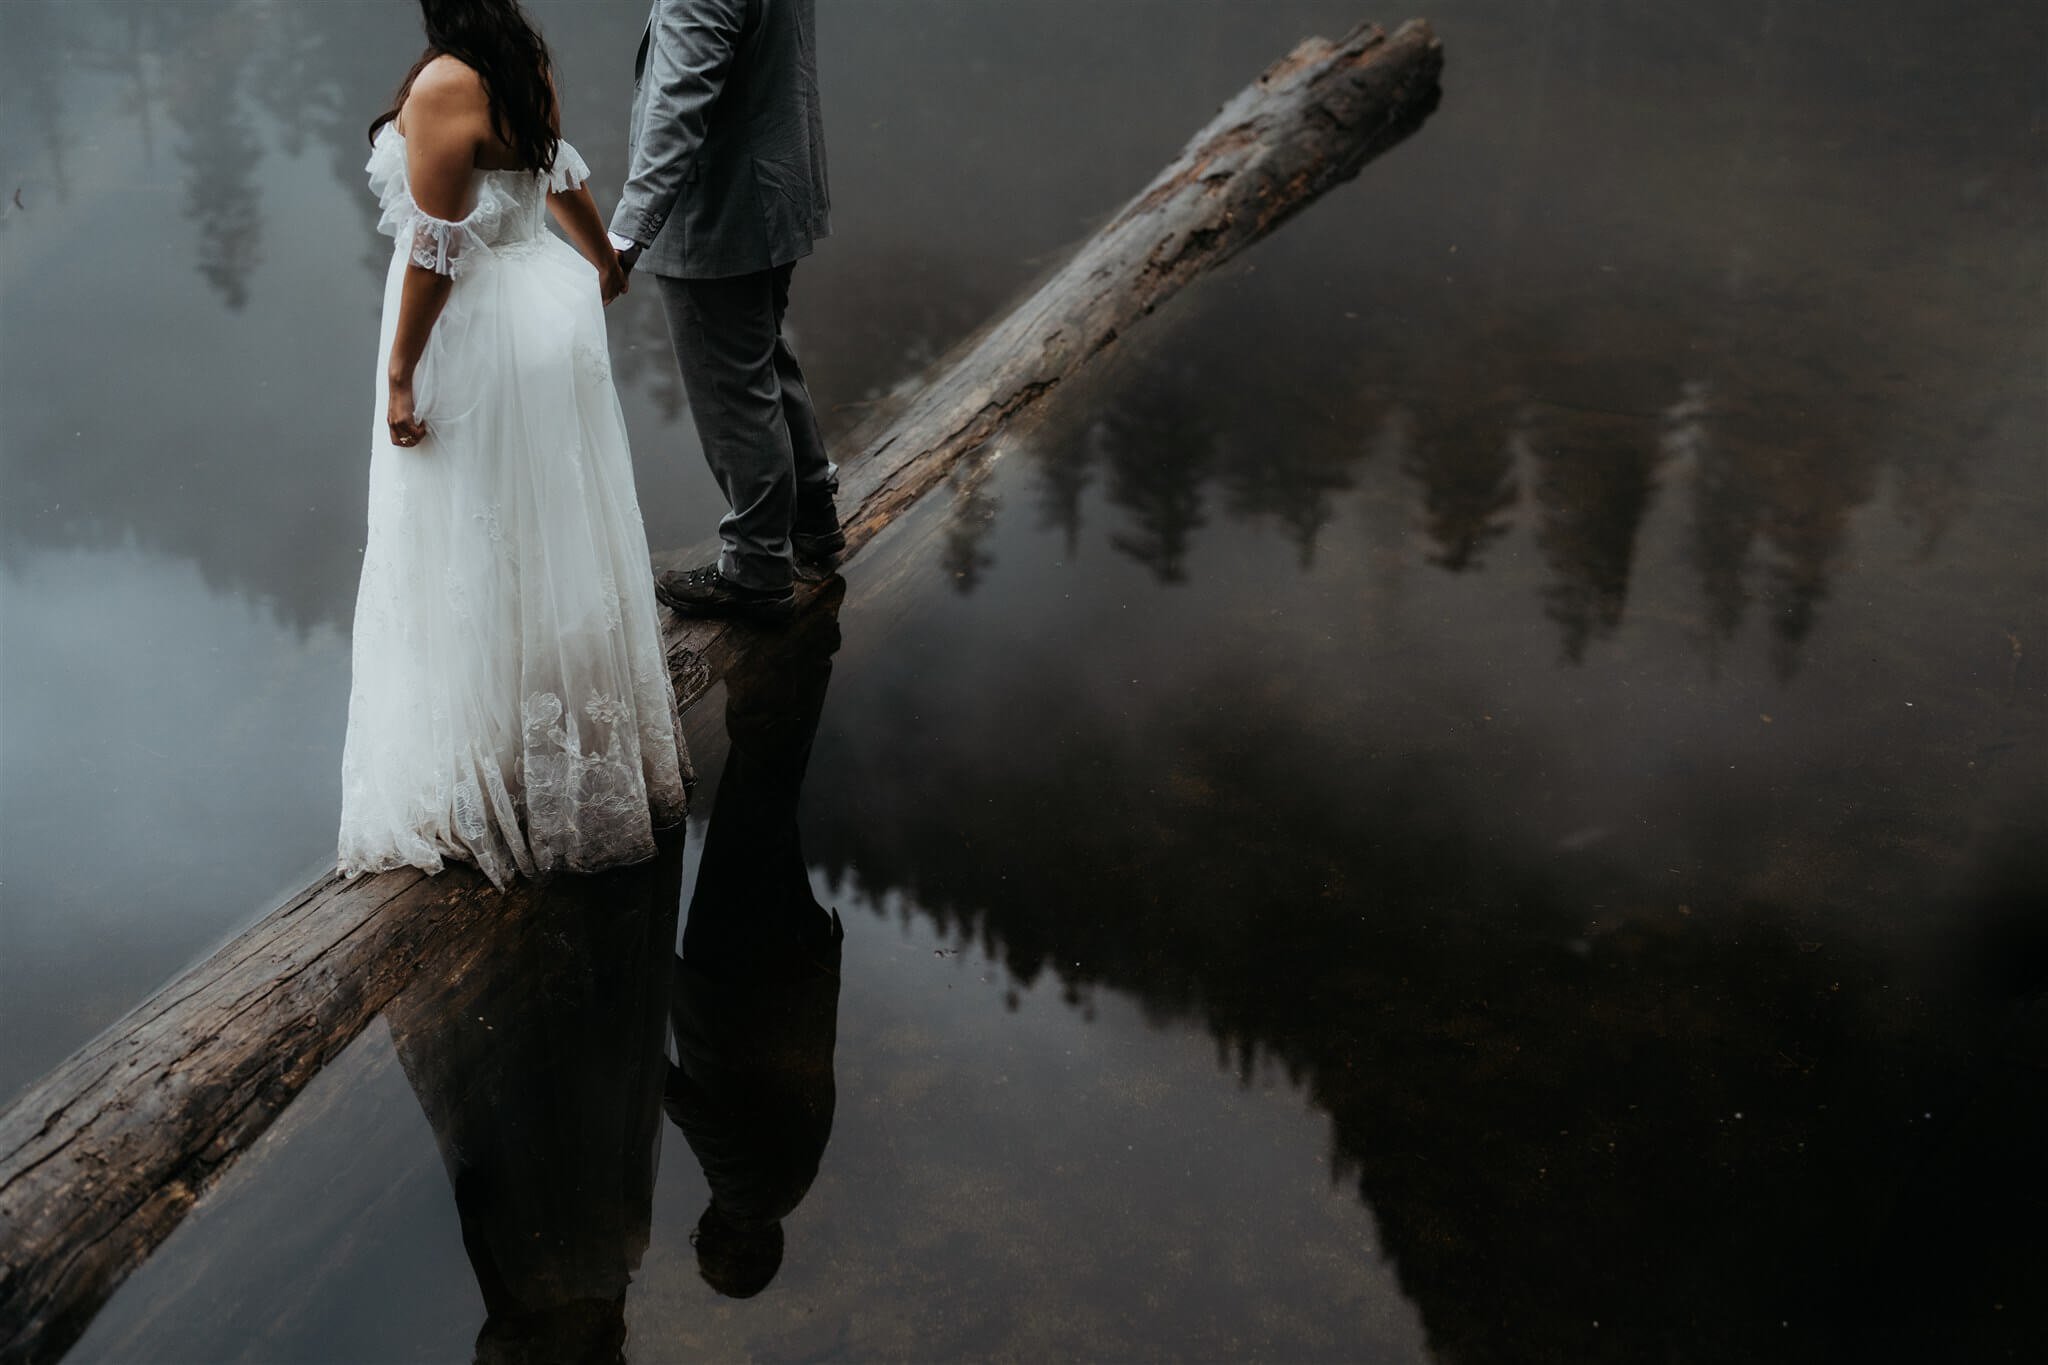 Bride and groom couple portraits at North Cascades elopement